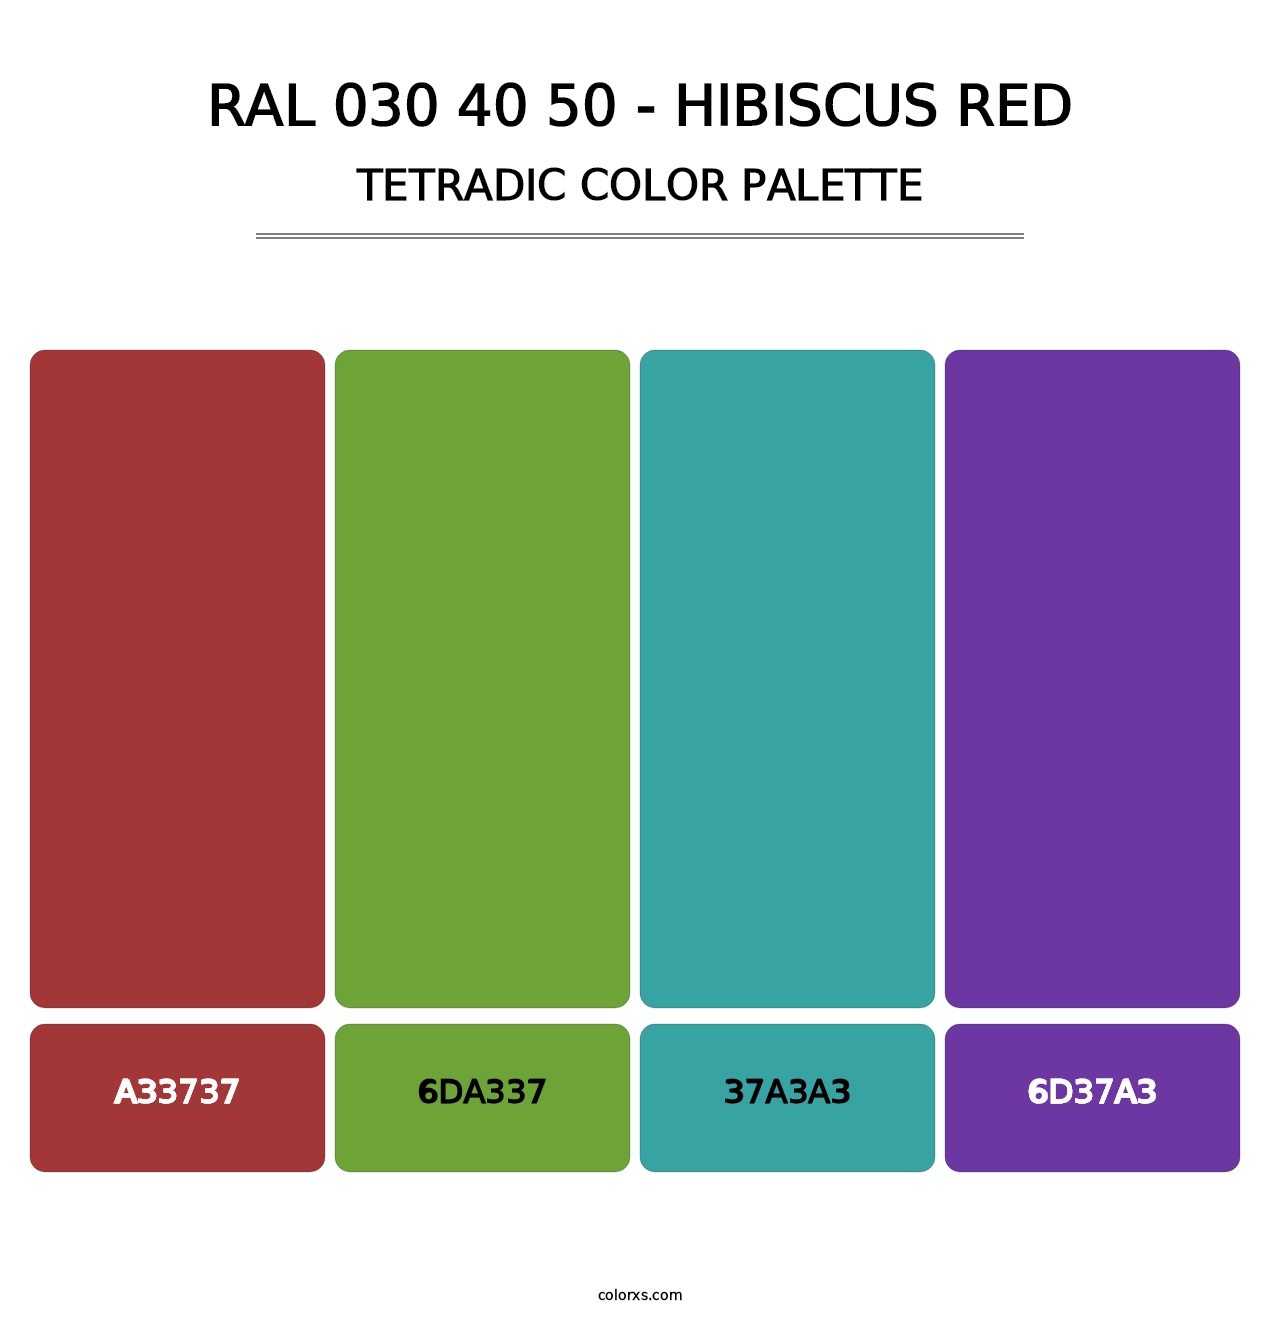 RAL 030 40 50 - Hibiscus Red - Tetradic Color Palette